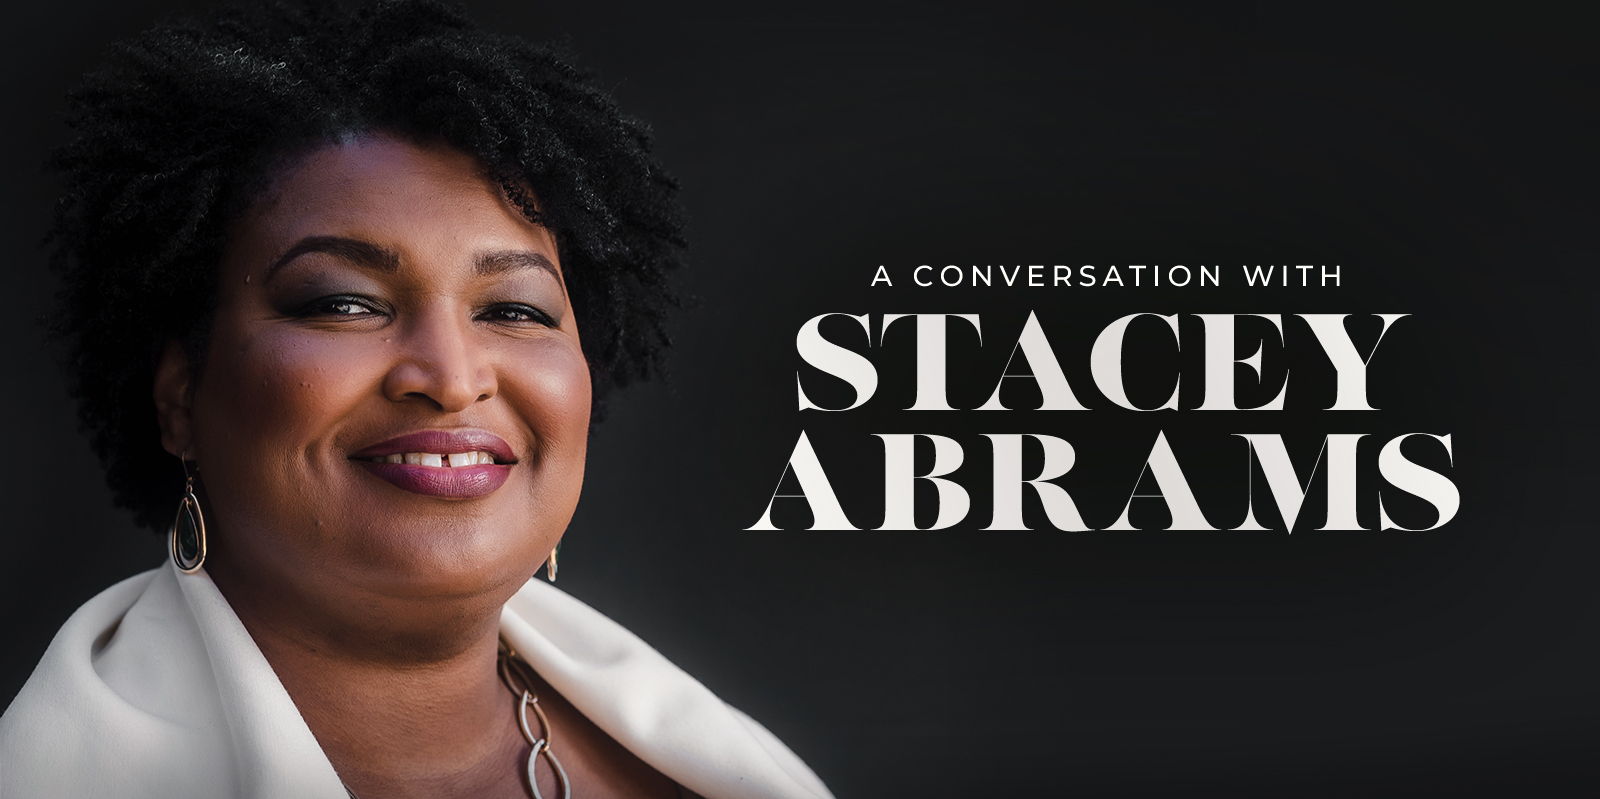 A Conversation with Stacey Abrams promotional image